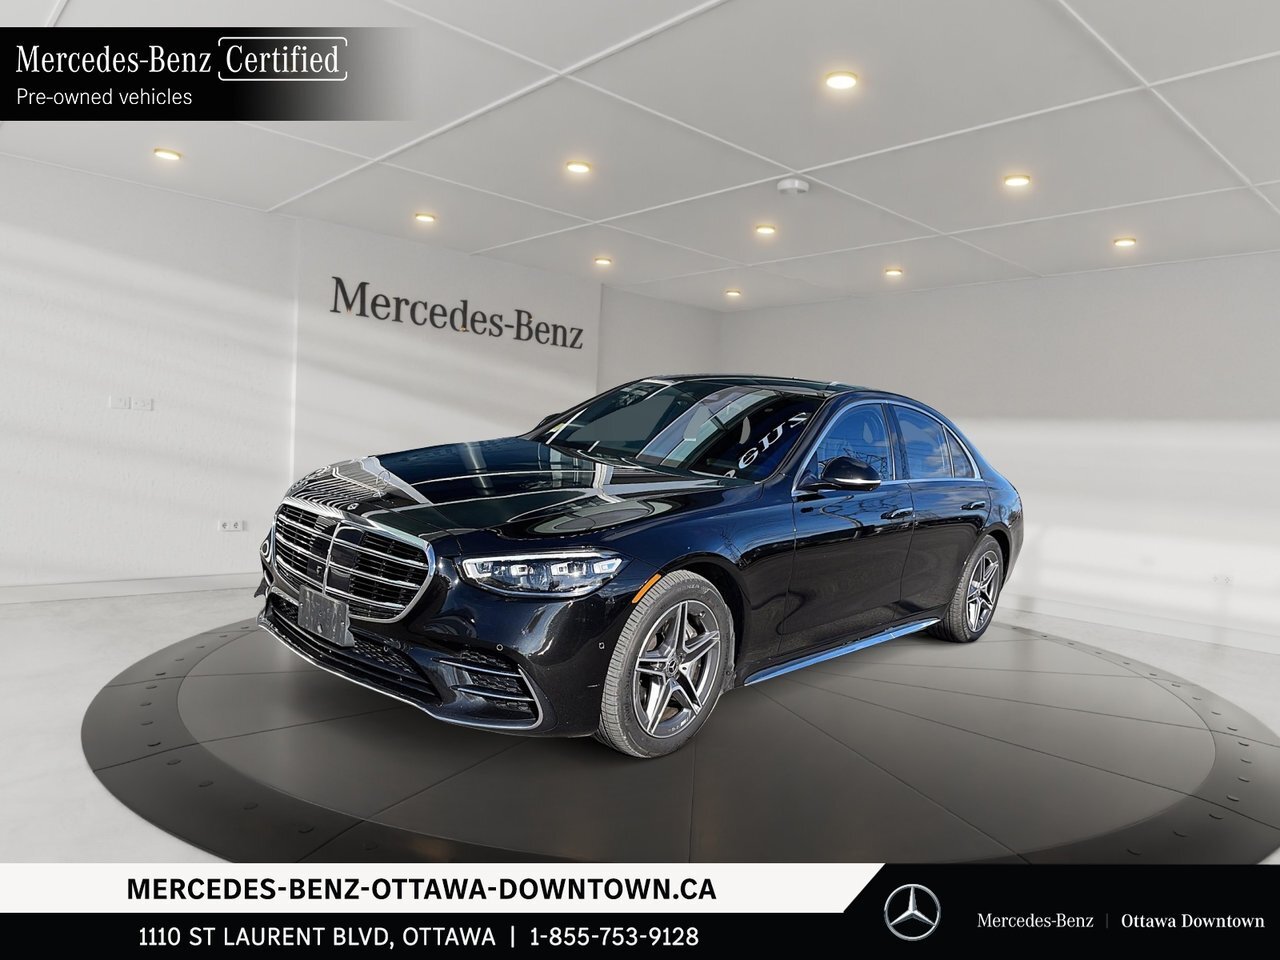 2021 Mercedes-Benz S500 4MATIC Sedan- Premium rear seating package One Own